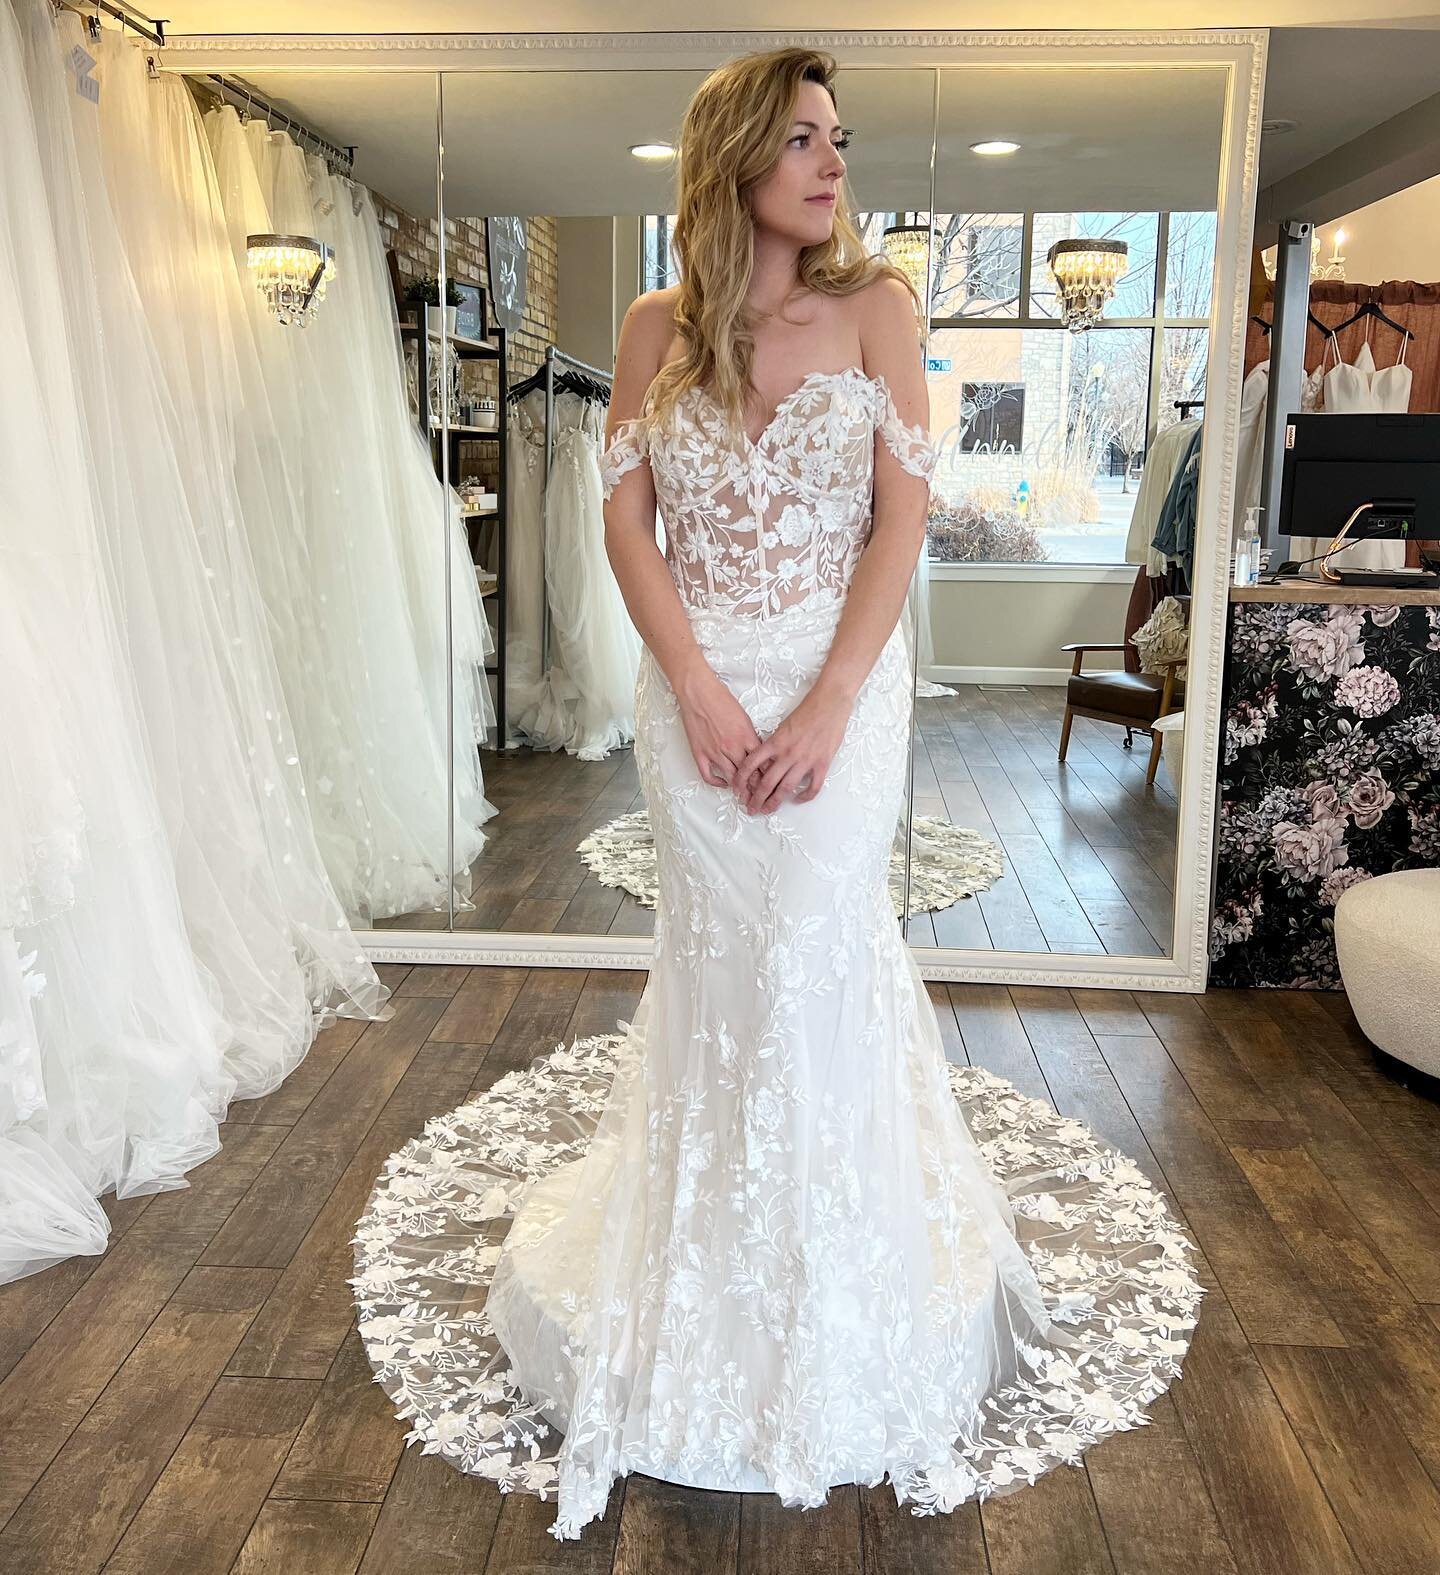 Catching up on some of the new dresses in the store&hellip; what do you think of this @allurebridals gown?

2023 brides, you should be shopping! Saturdays are booked through February so don&rsquo;t wait!